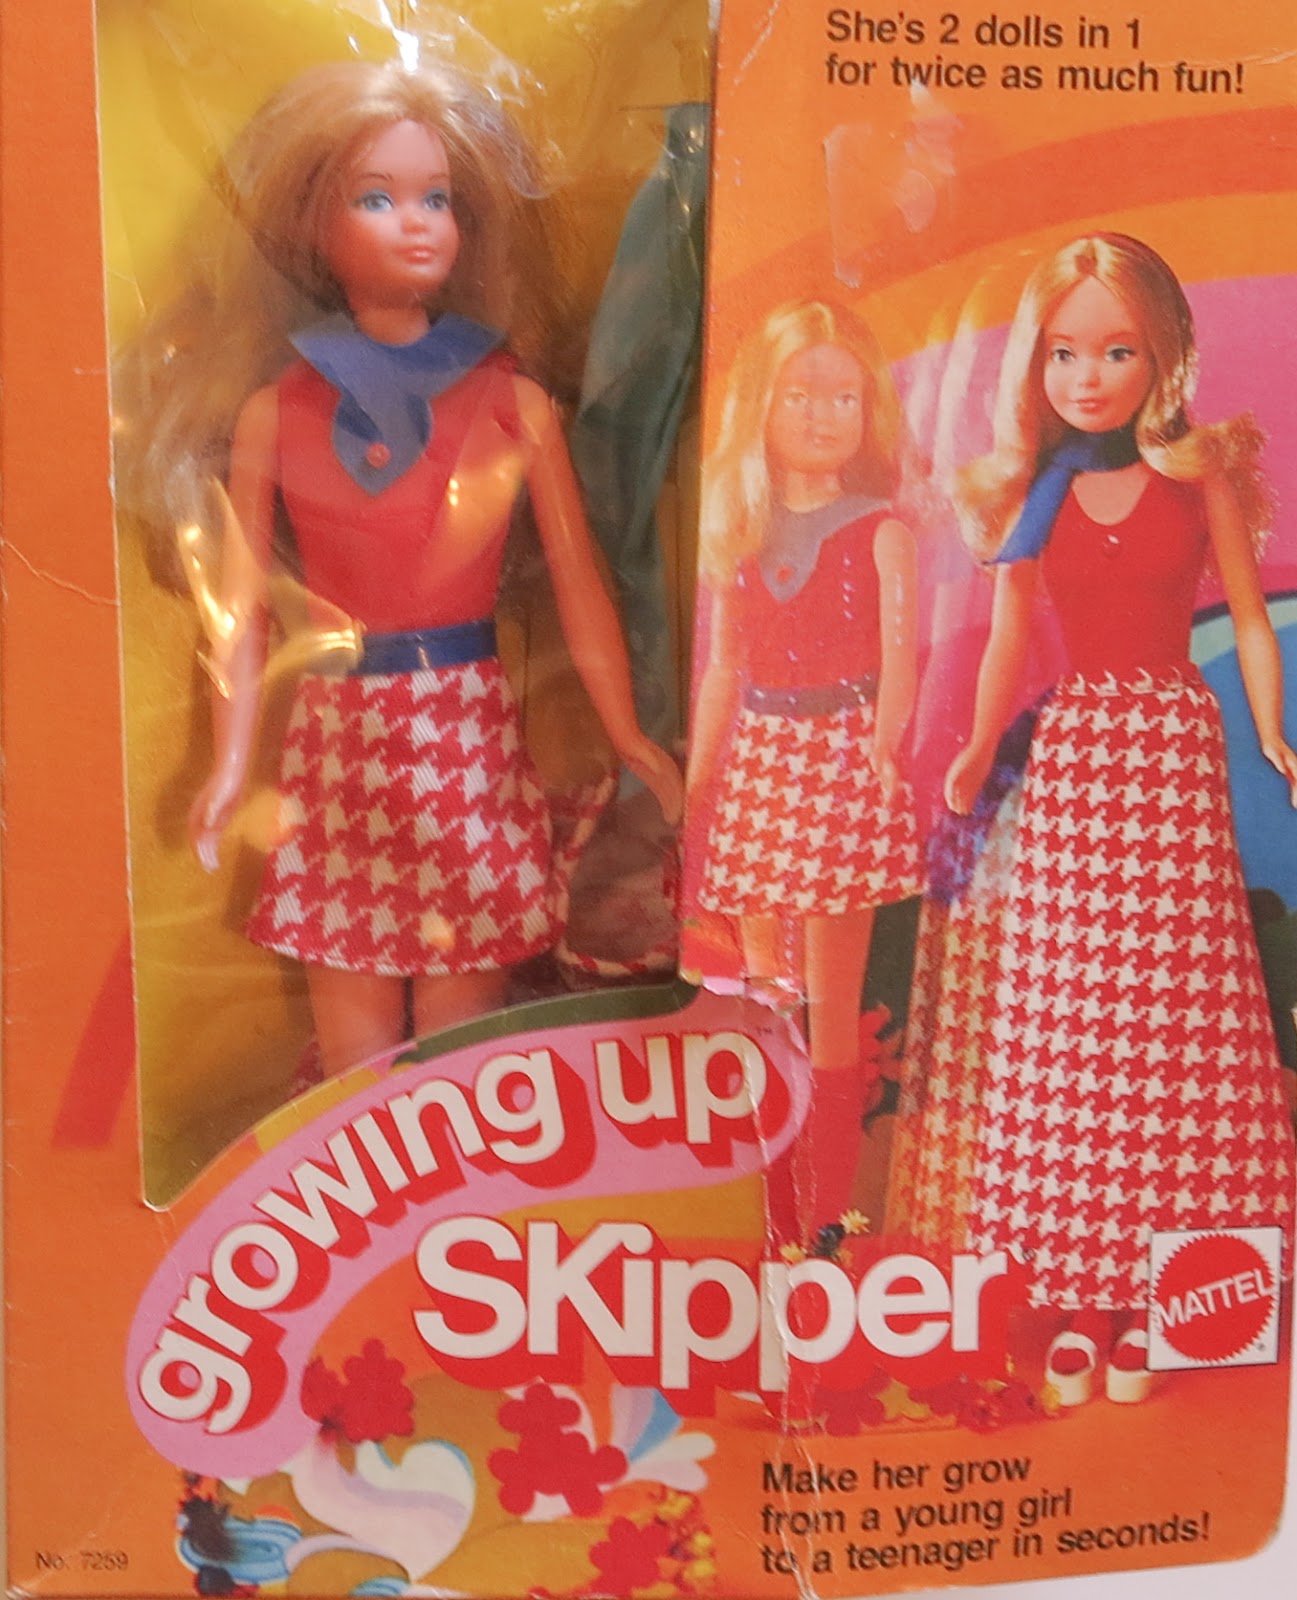 Growing Up Skipper and Ginger – Jenjoy's All Dolled Up Page